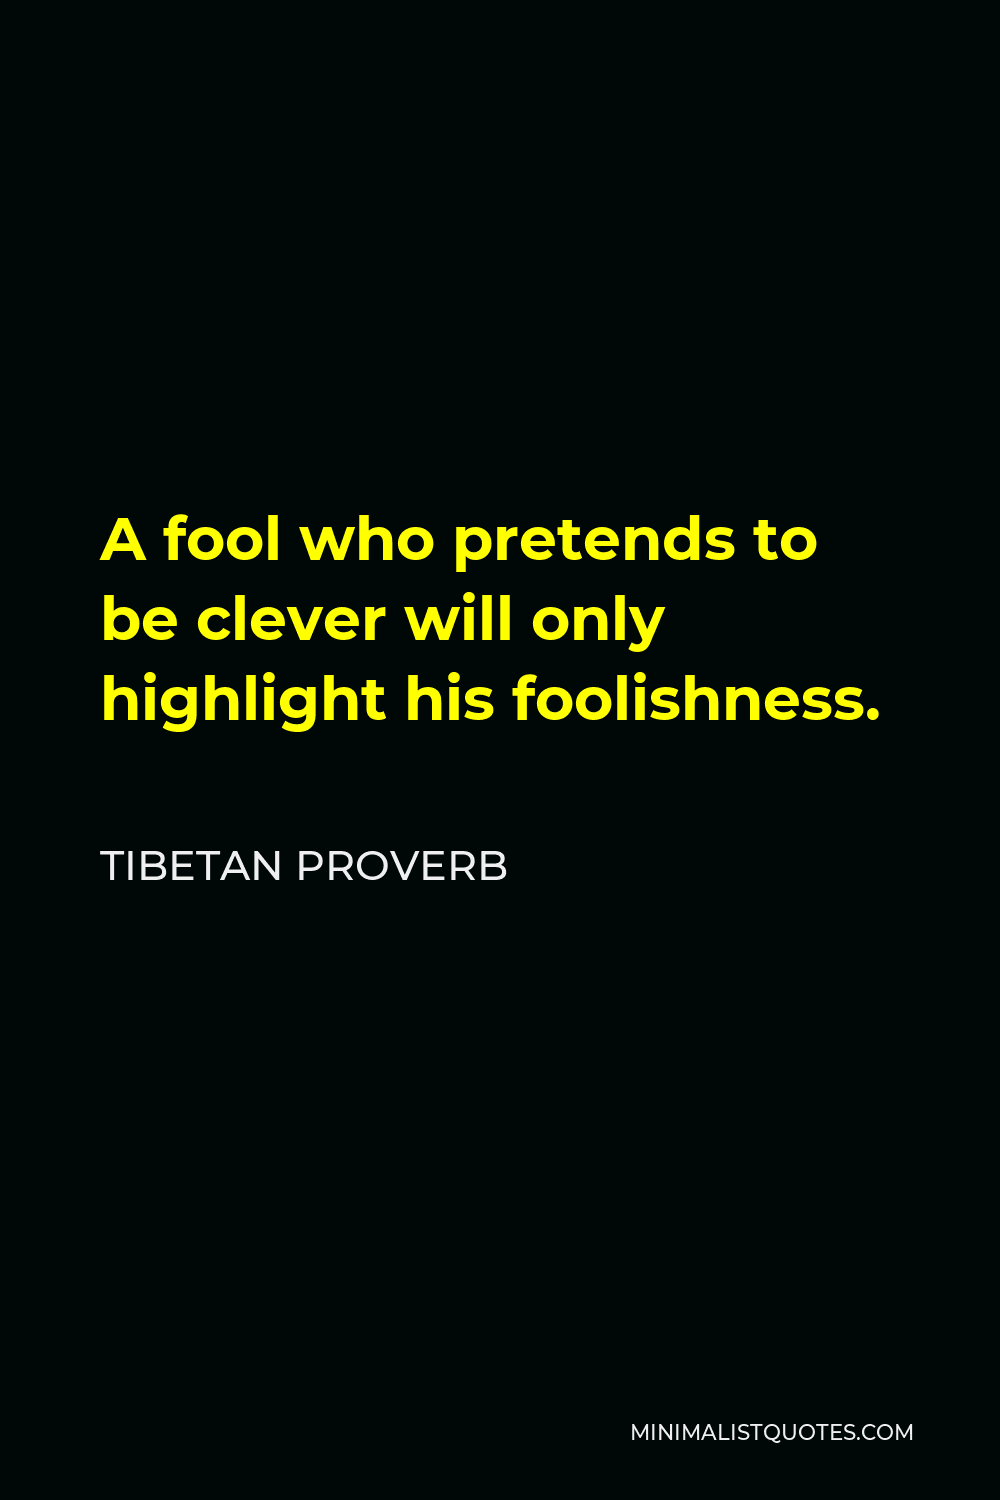 Tibetan Proverb Quote - A fool who pretends to be clever will only highlight his foolishness.